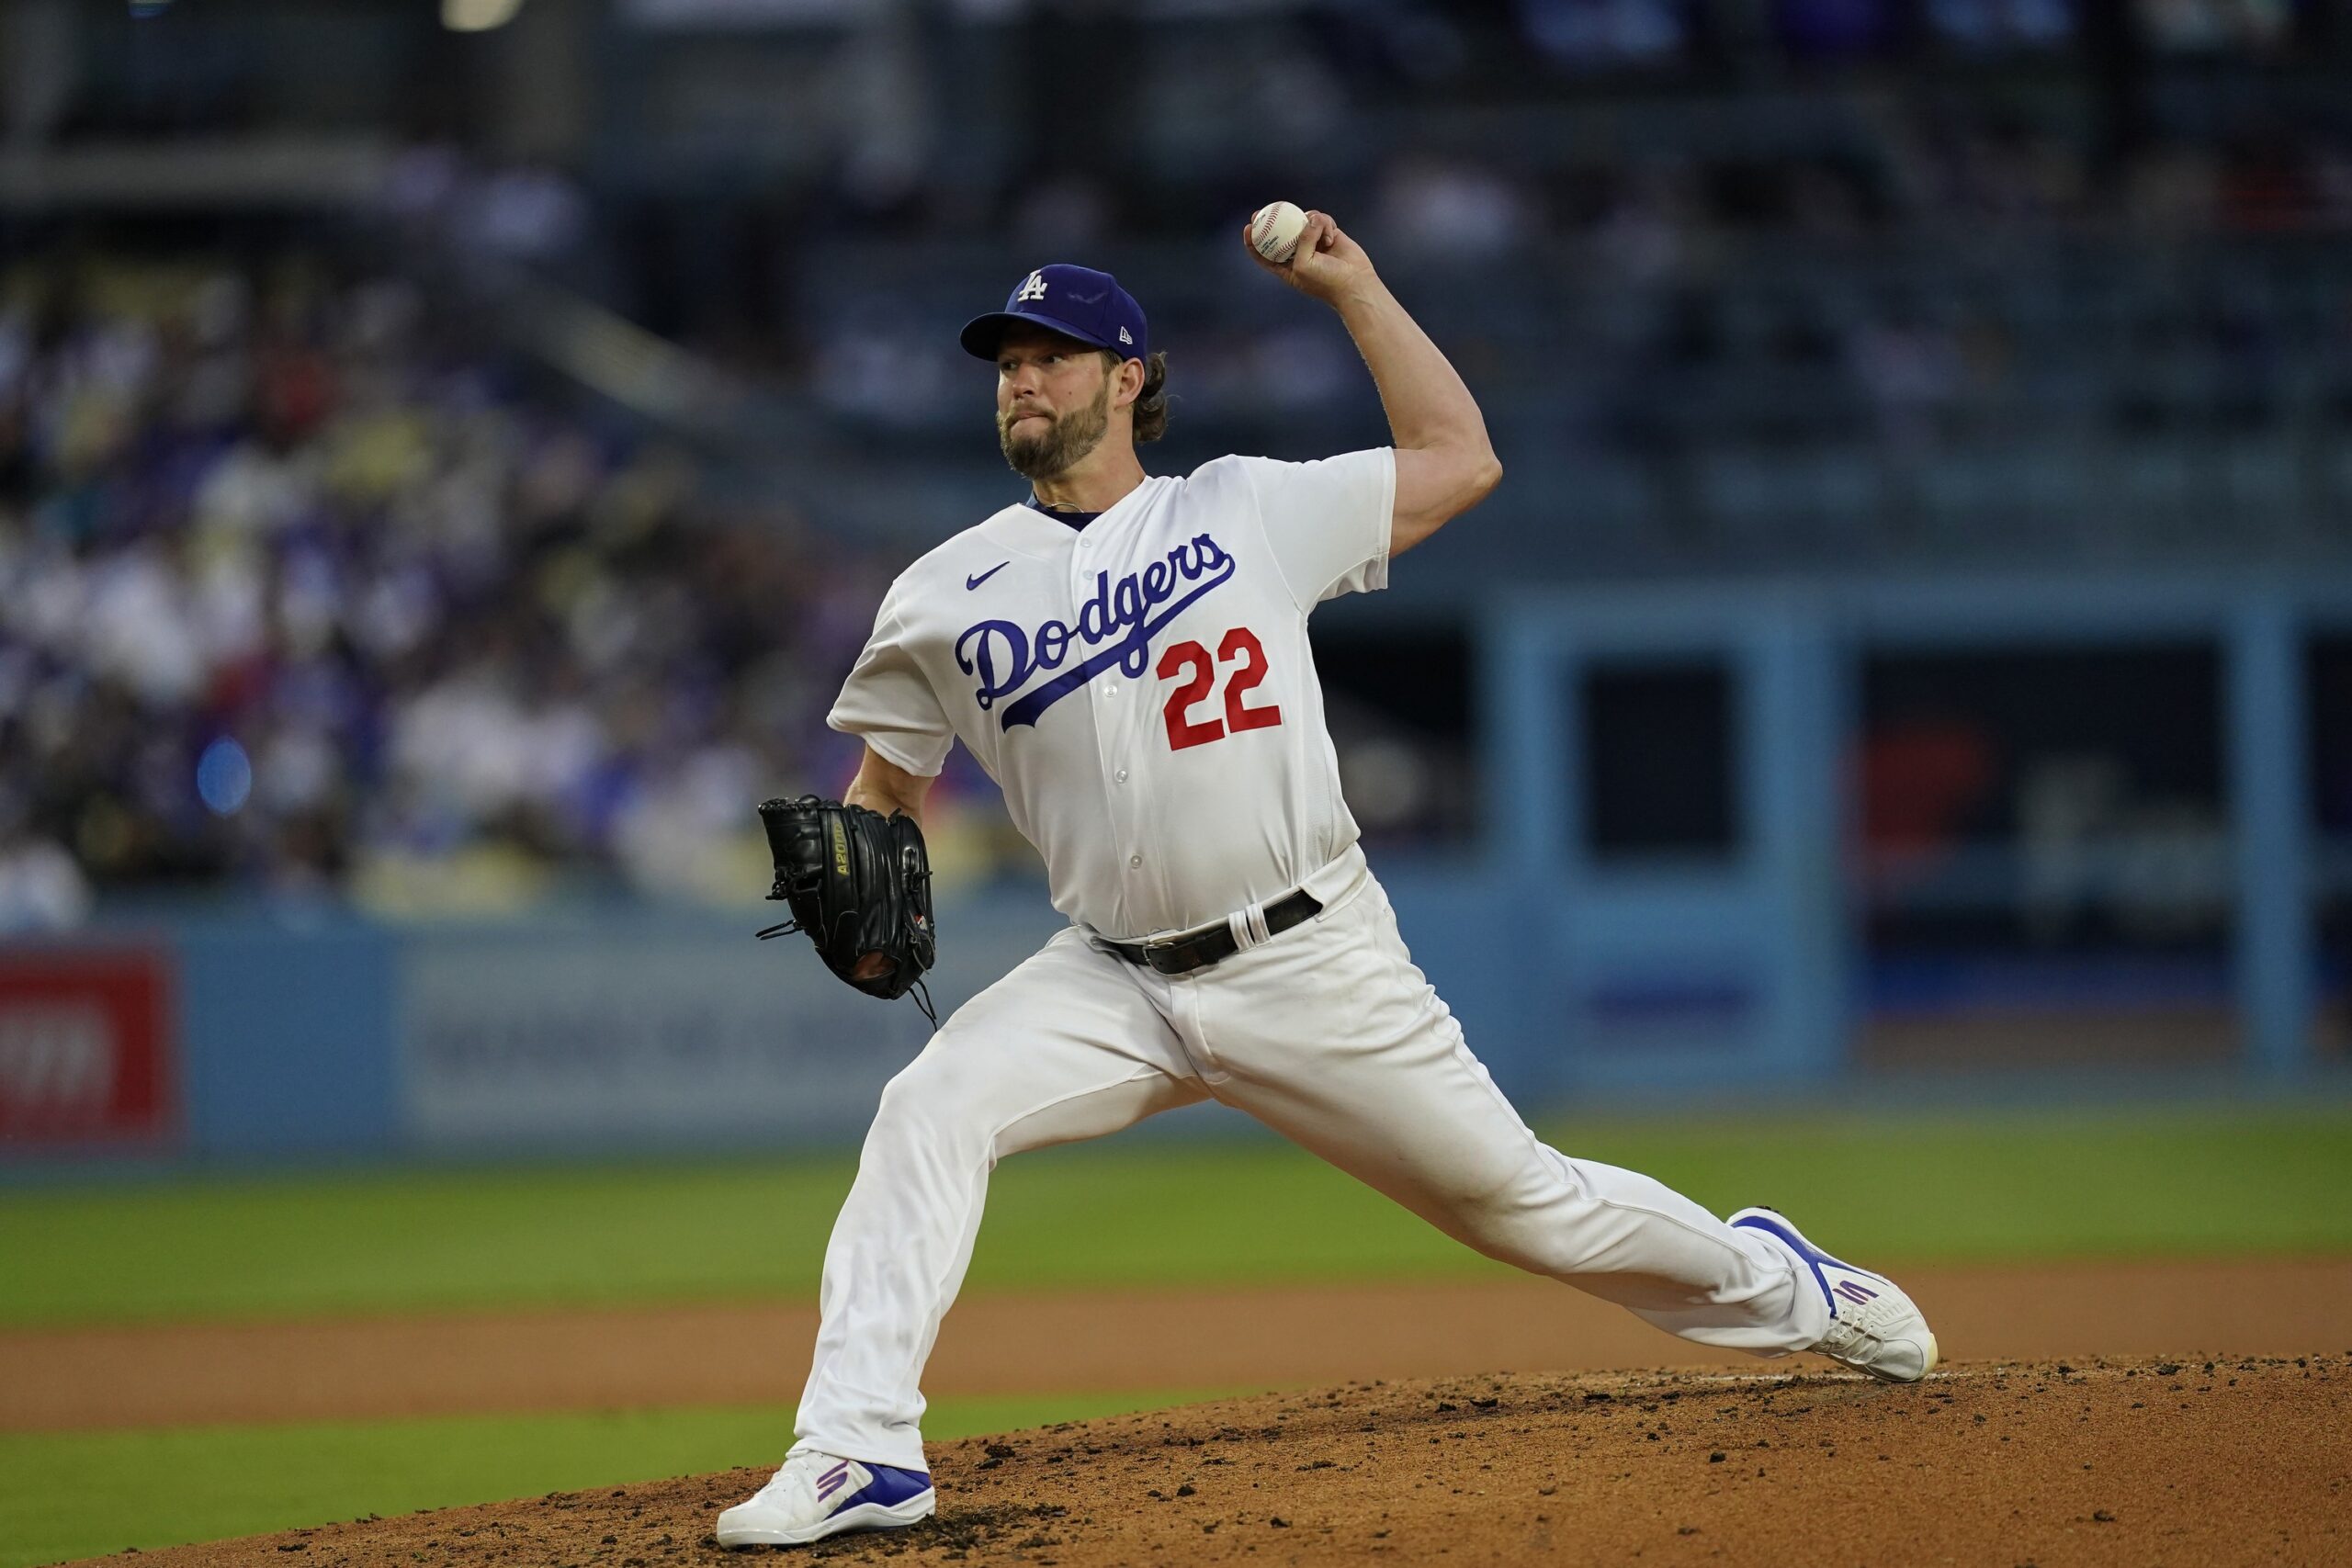 Dodgers News: Clayton Kershaw May Miss Start Following Passing of His Mother